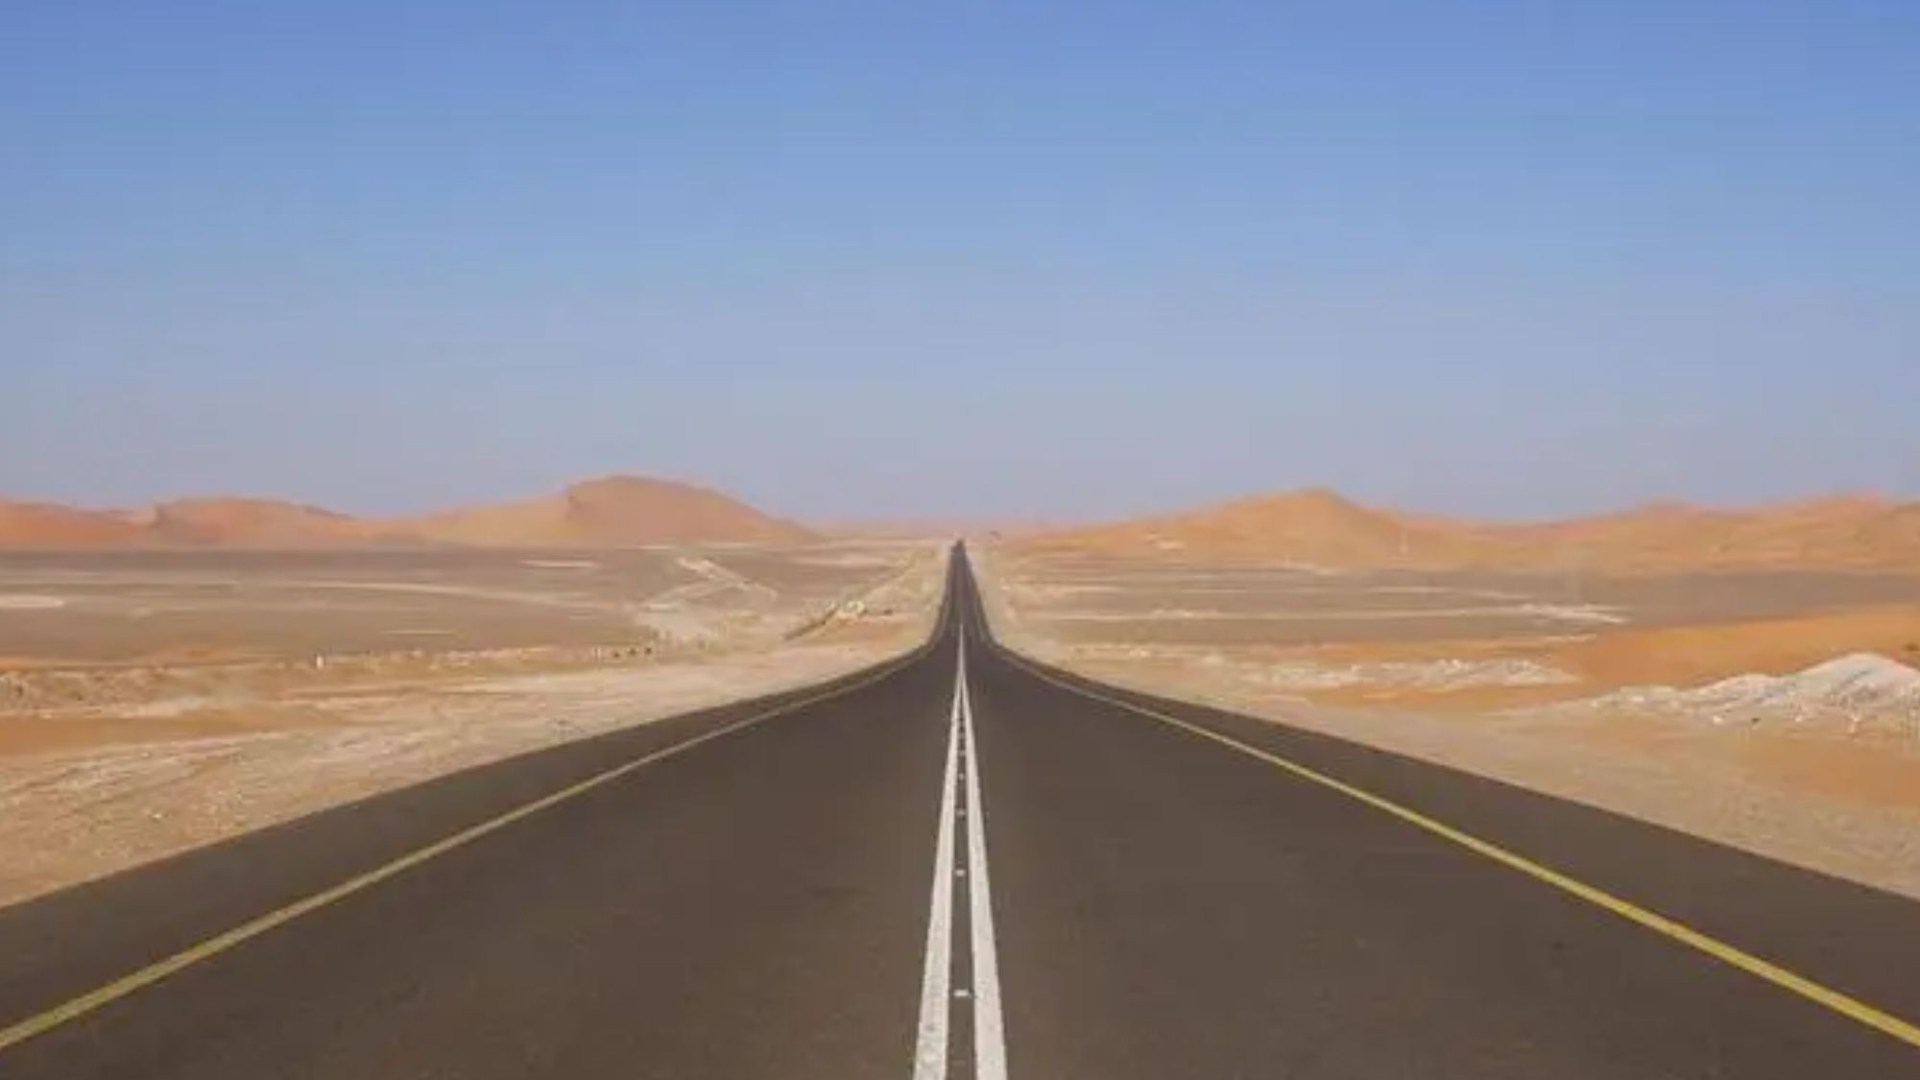 Worlds longest stretch of straight road built across desert as king’s private track & takes 2 HOURS to travel across [Video]